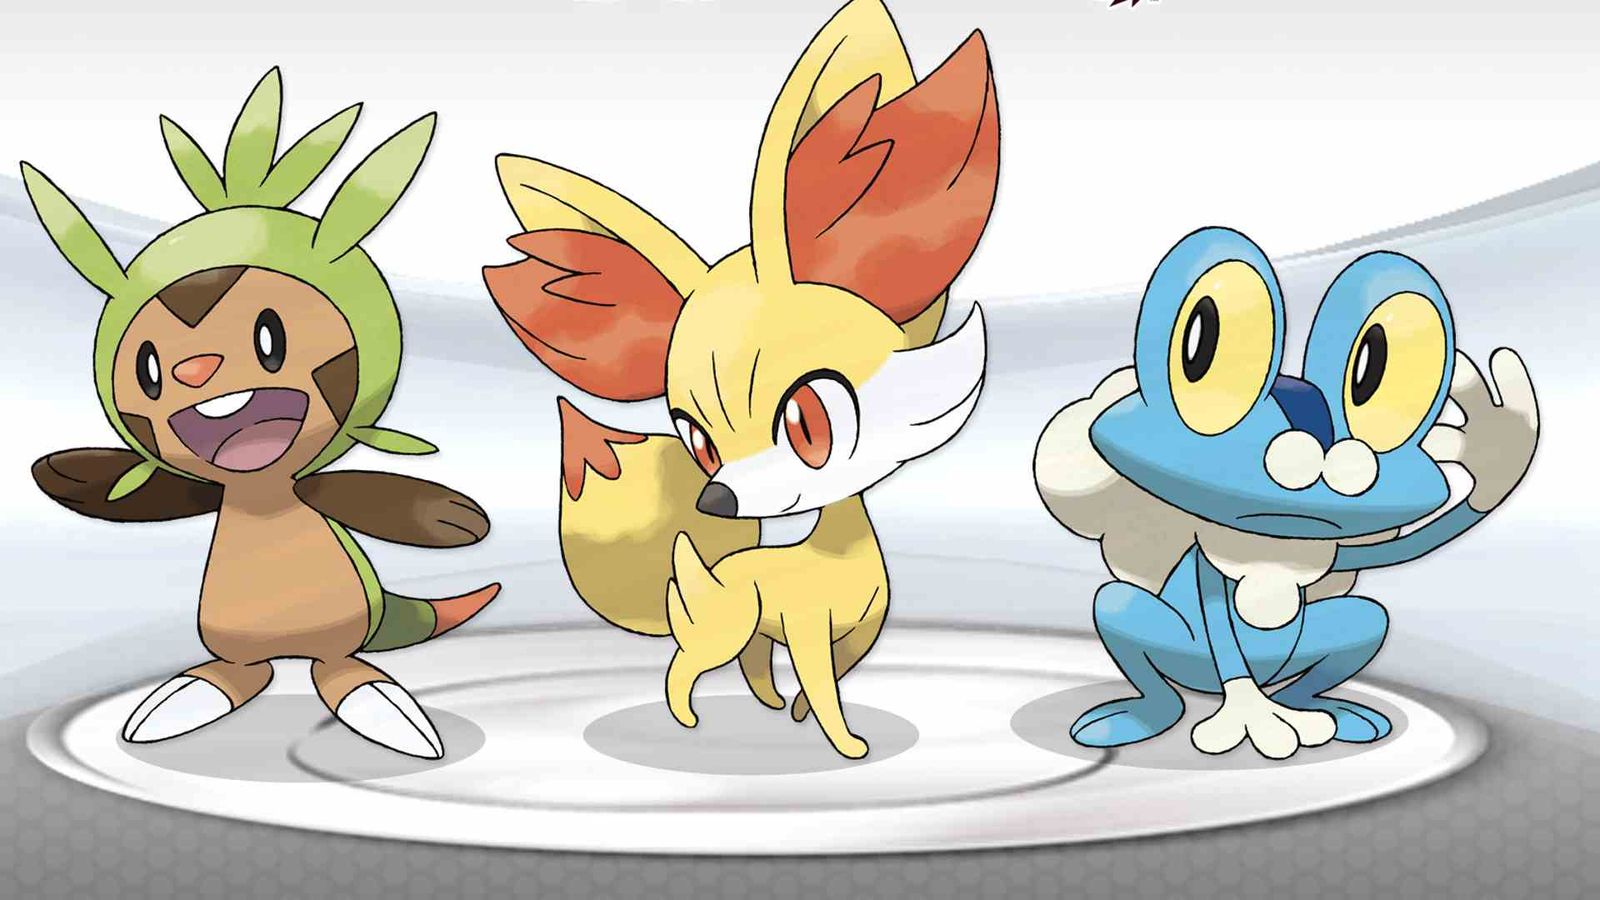 Image of the Pokémon Chespin, Fennekin, and Froakie stood together.